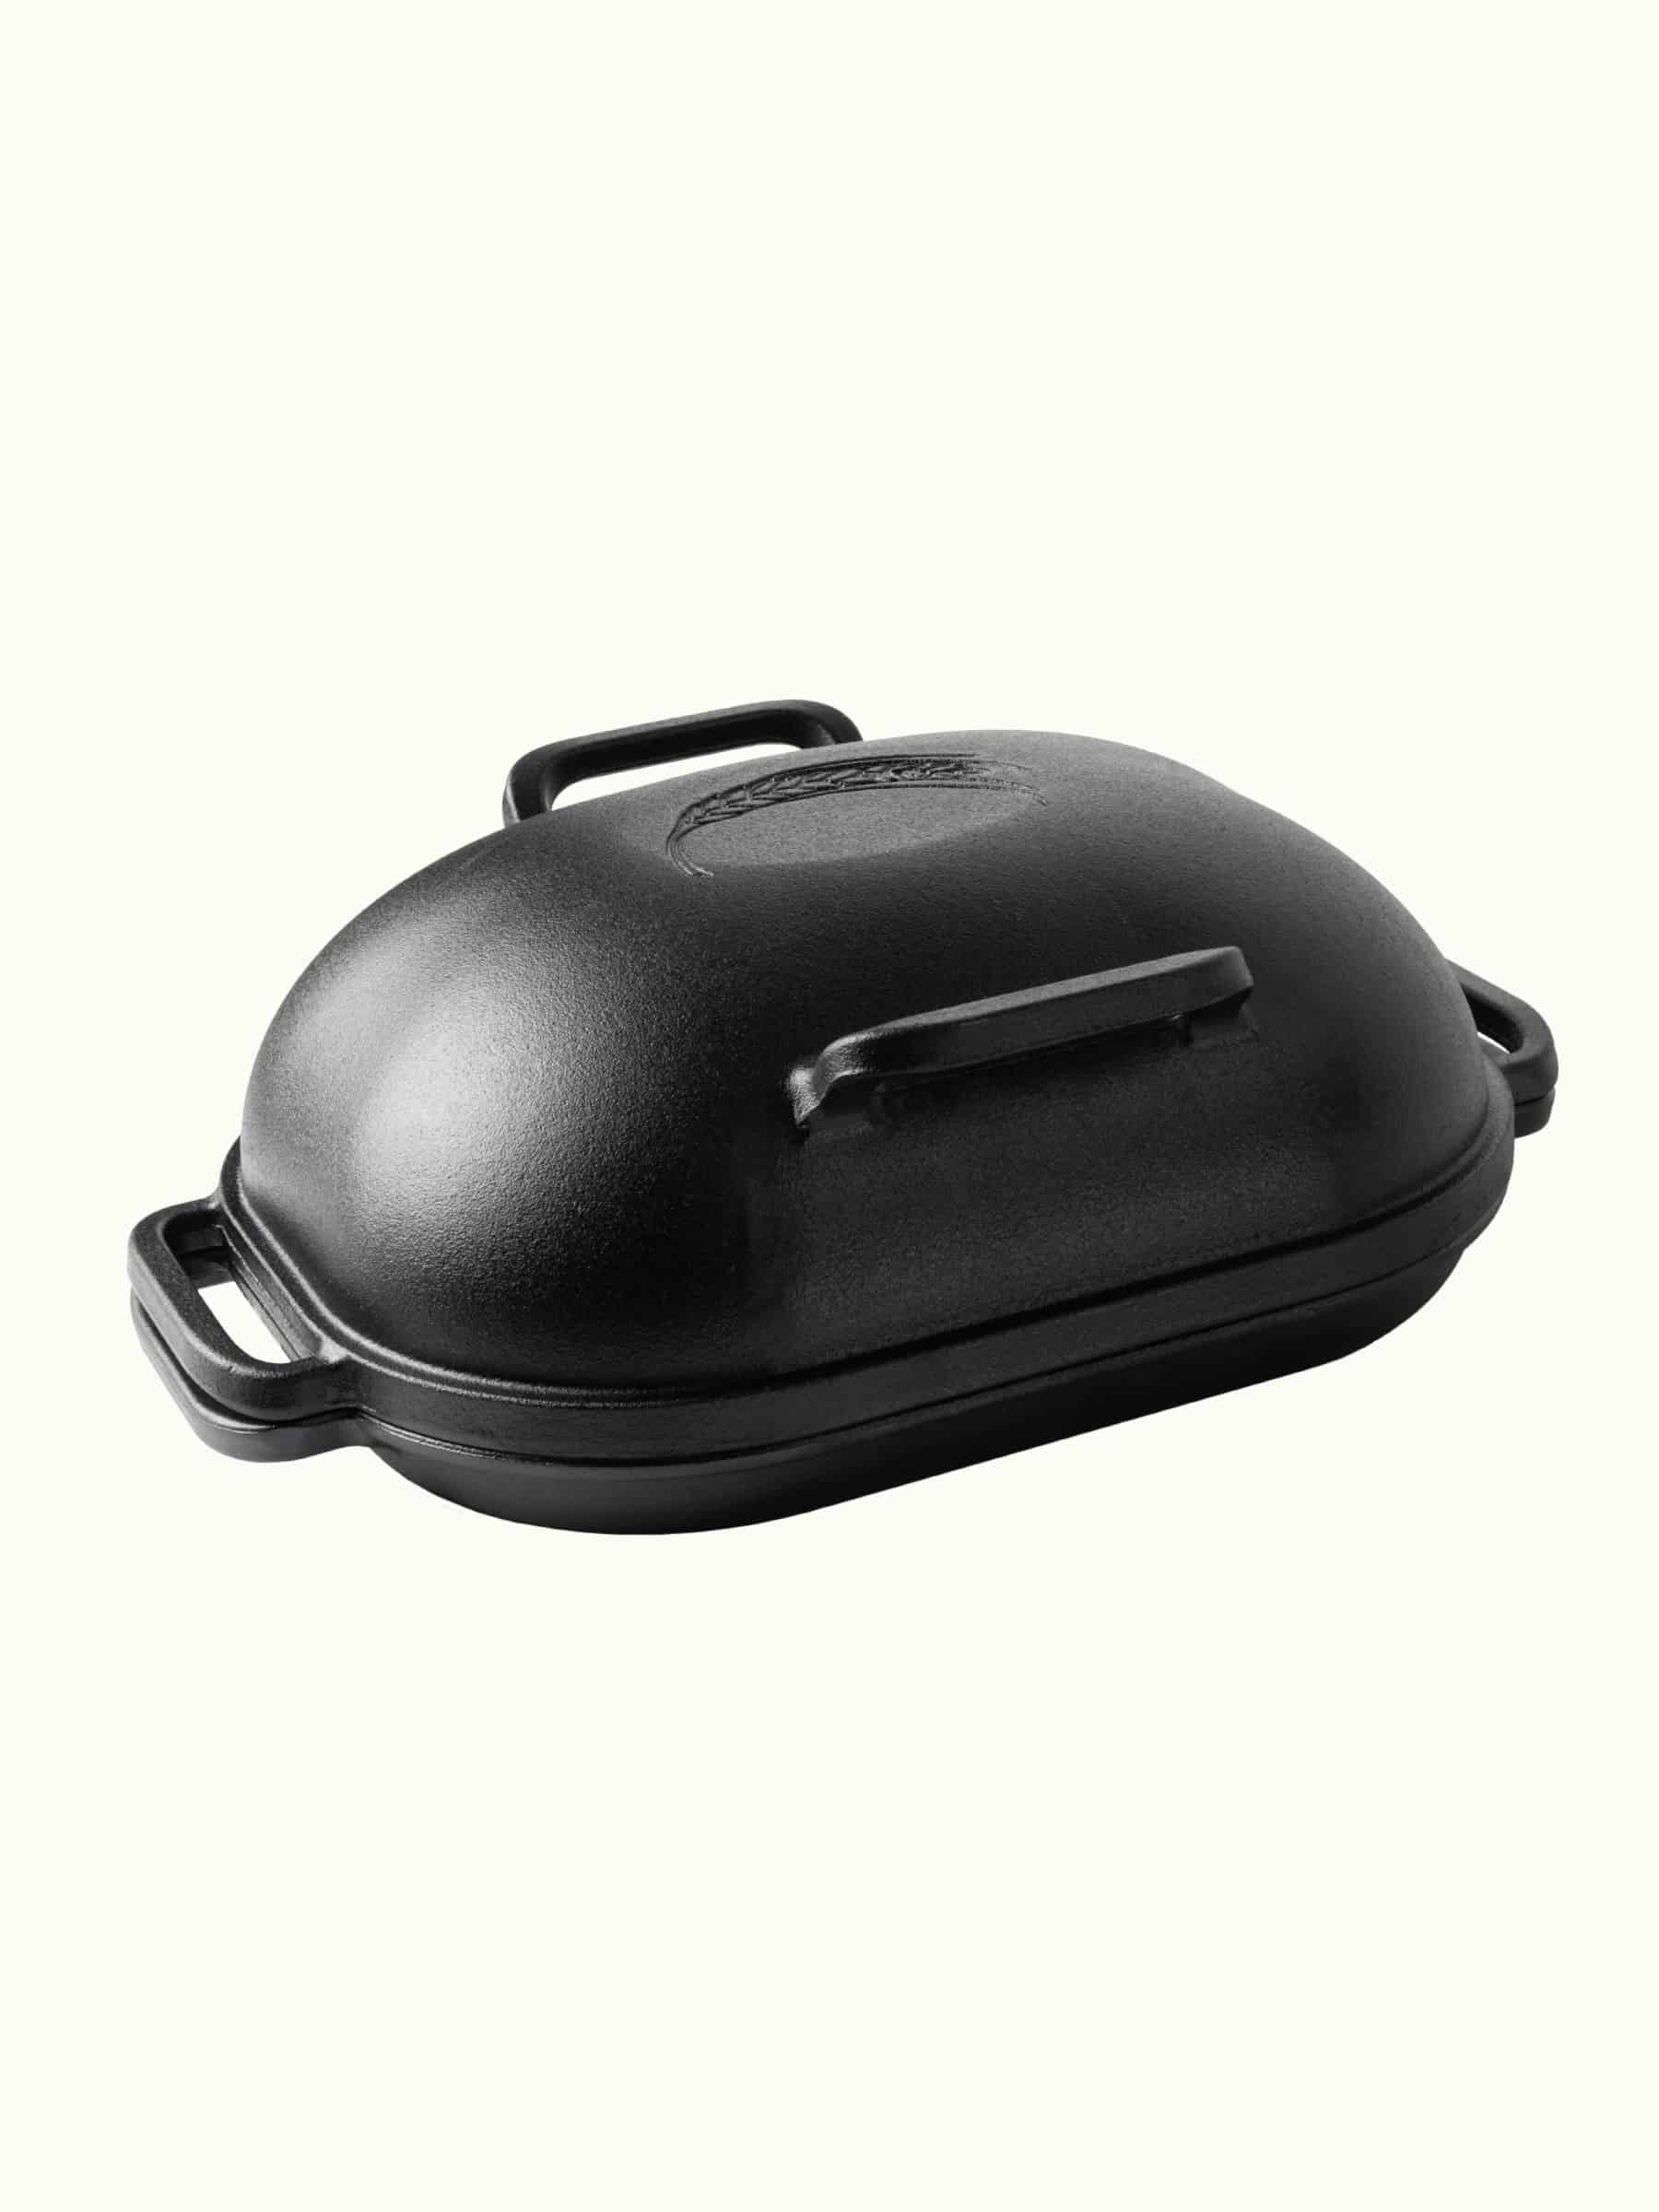 Challenger Breadware Bread Pan Review 2021